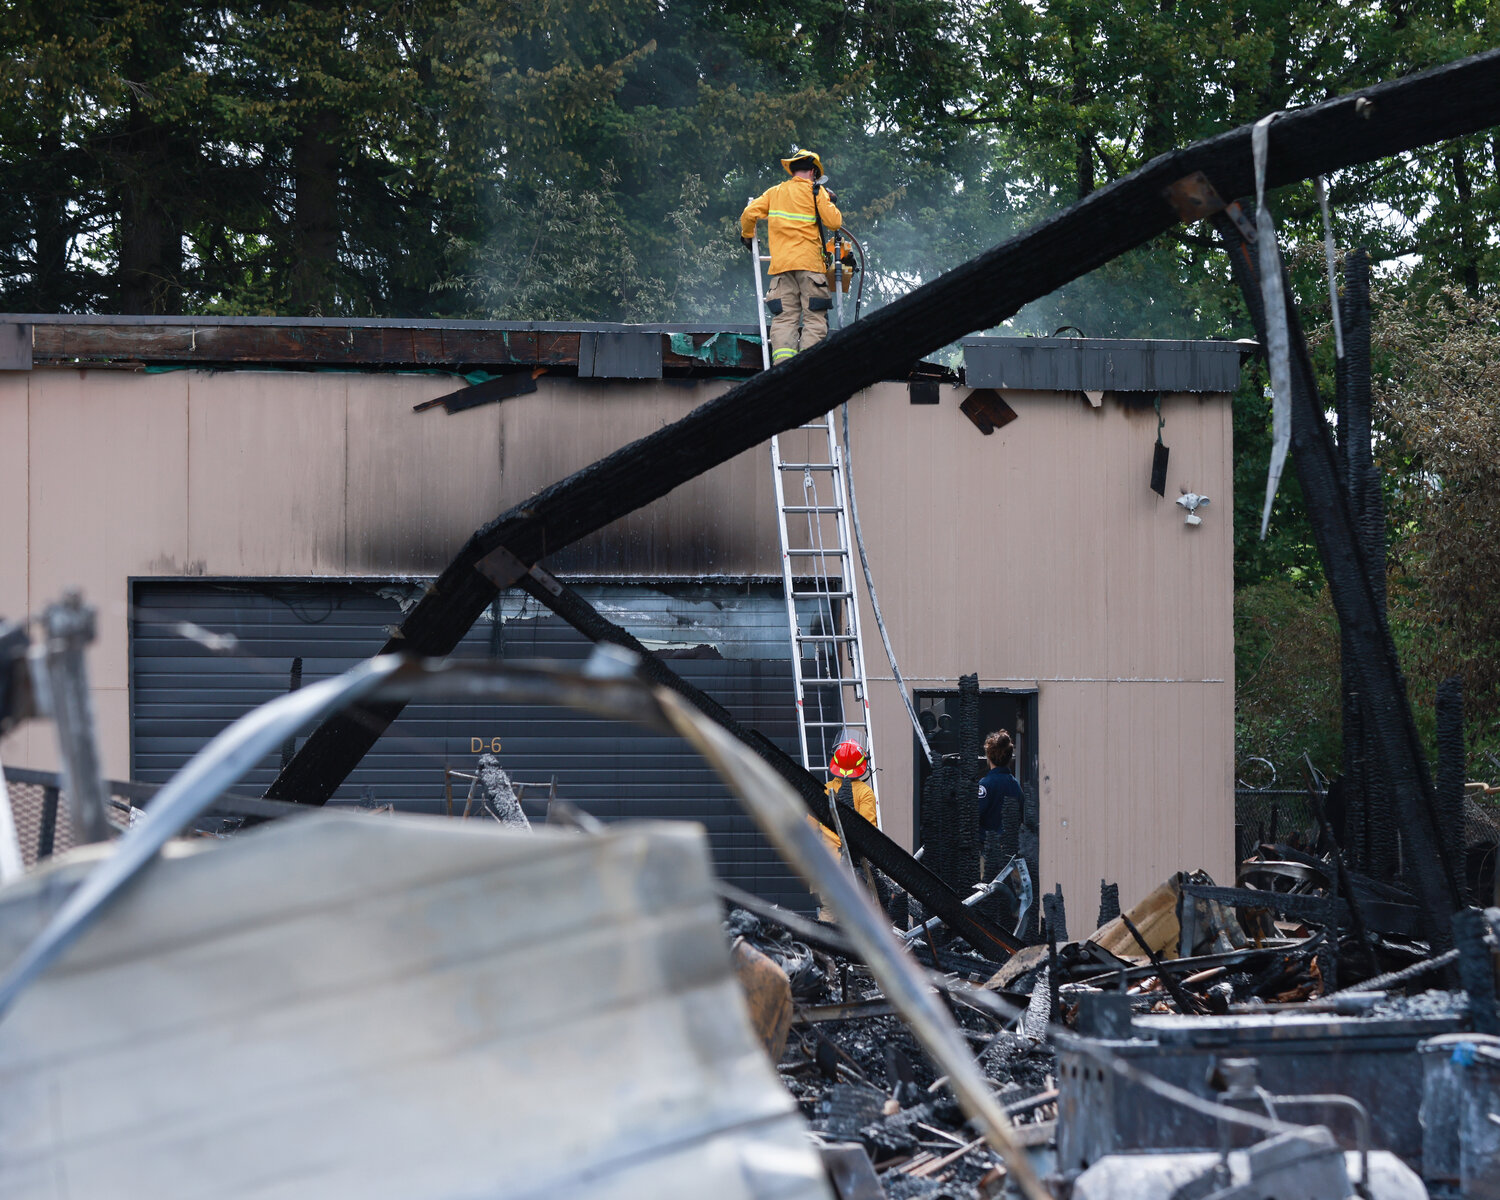 A firefighter checks a building at around 10:05 a.m. on Wednesday, June 7, as smoke rises from the roof following a two-alarm fire in Salmon Creek that destroyed at least seven businesses.